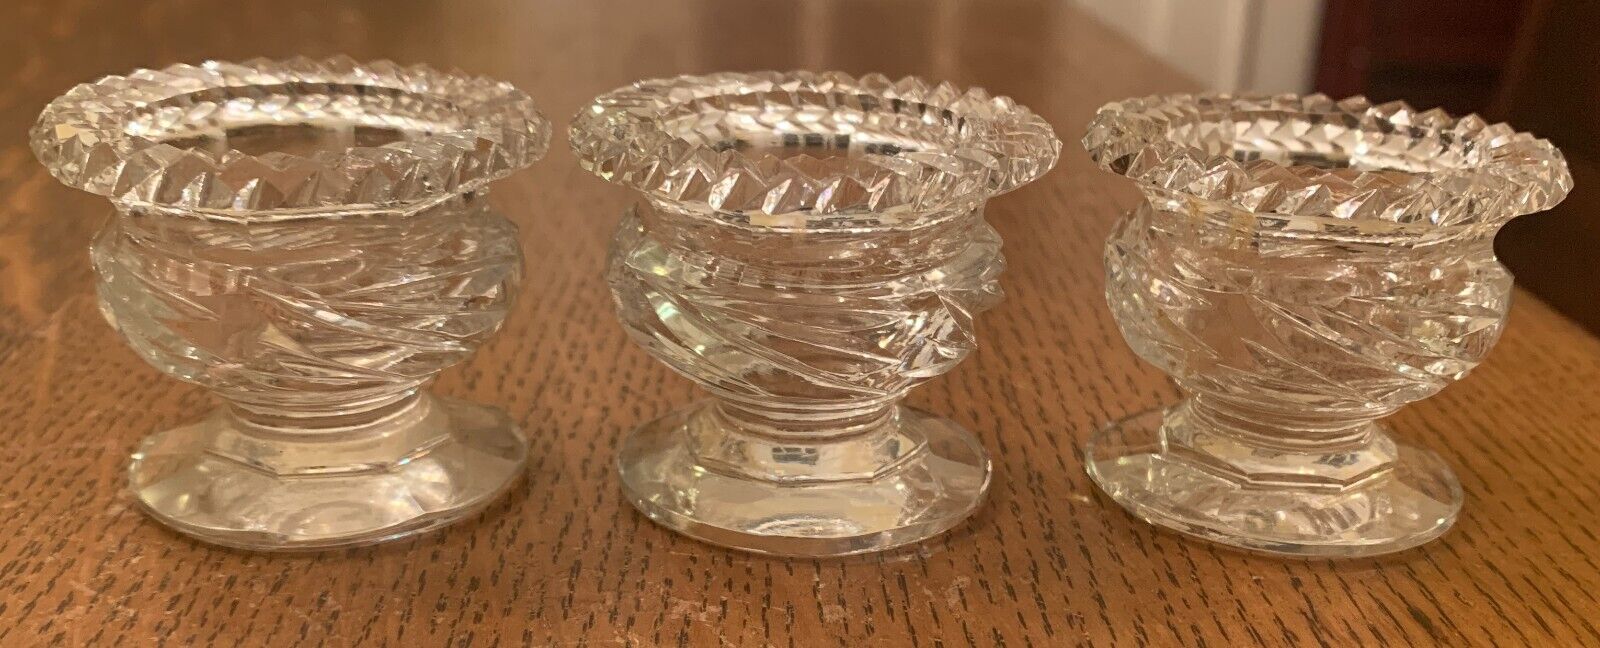 3 Antique footed cut lead crystal open Salt Cellars made in Czechoslovakia